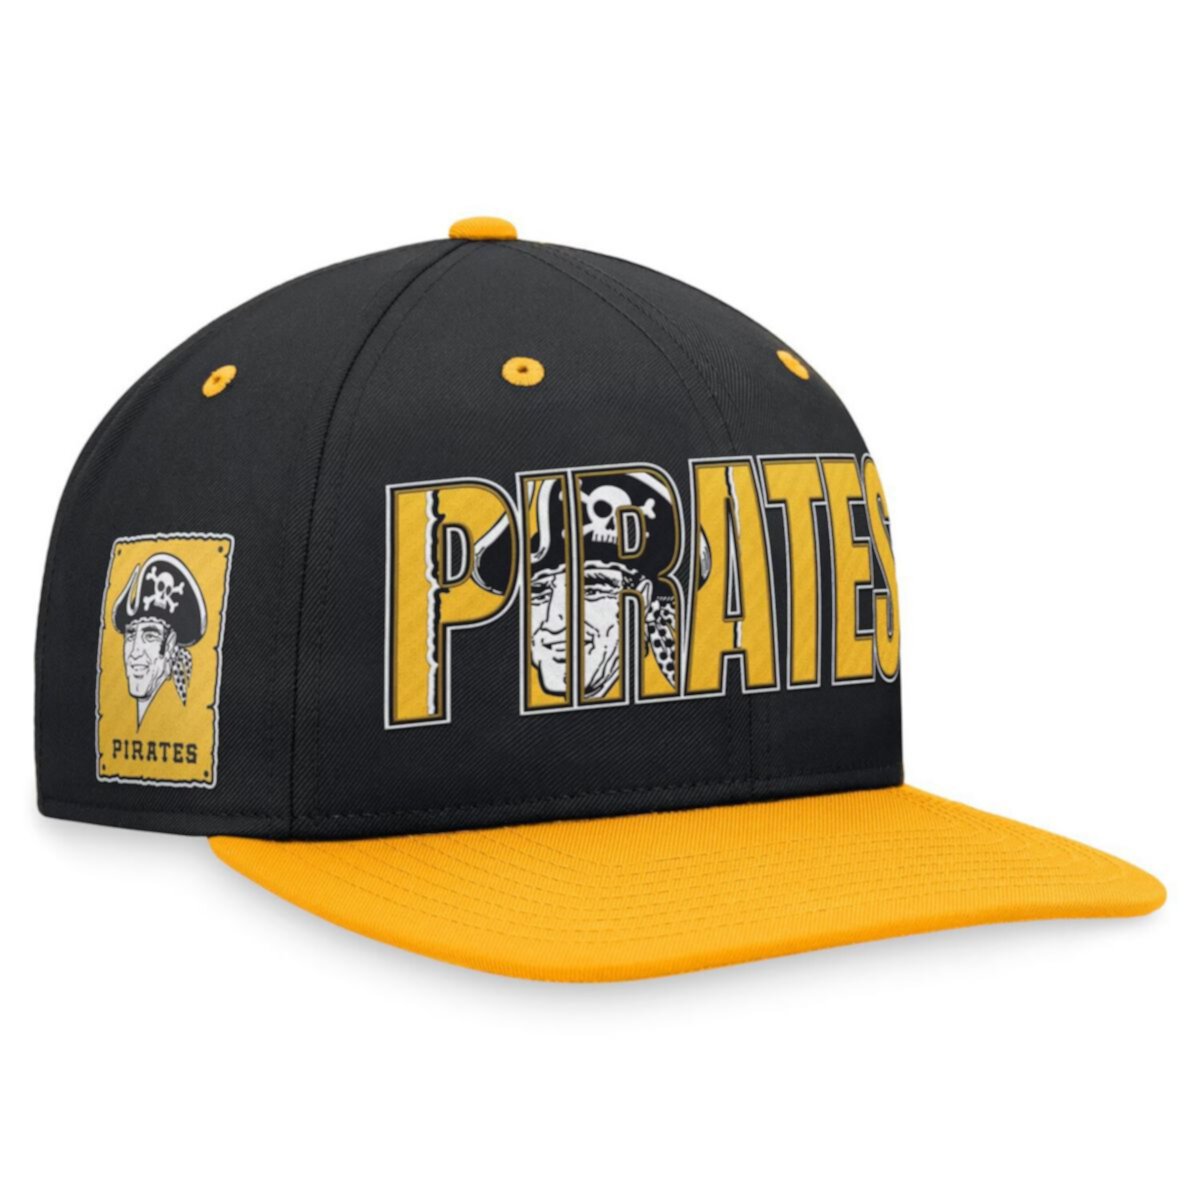 Men's Nike Black Pittsburgh Pirates Cooperstown Collection Pro Snapback Hat Nike